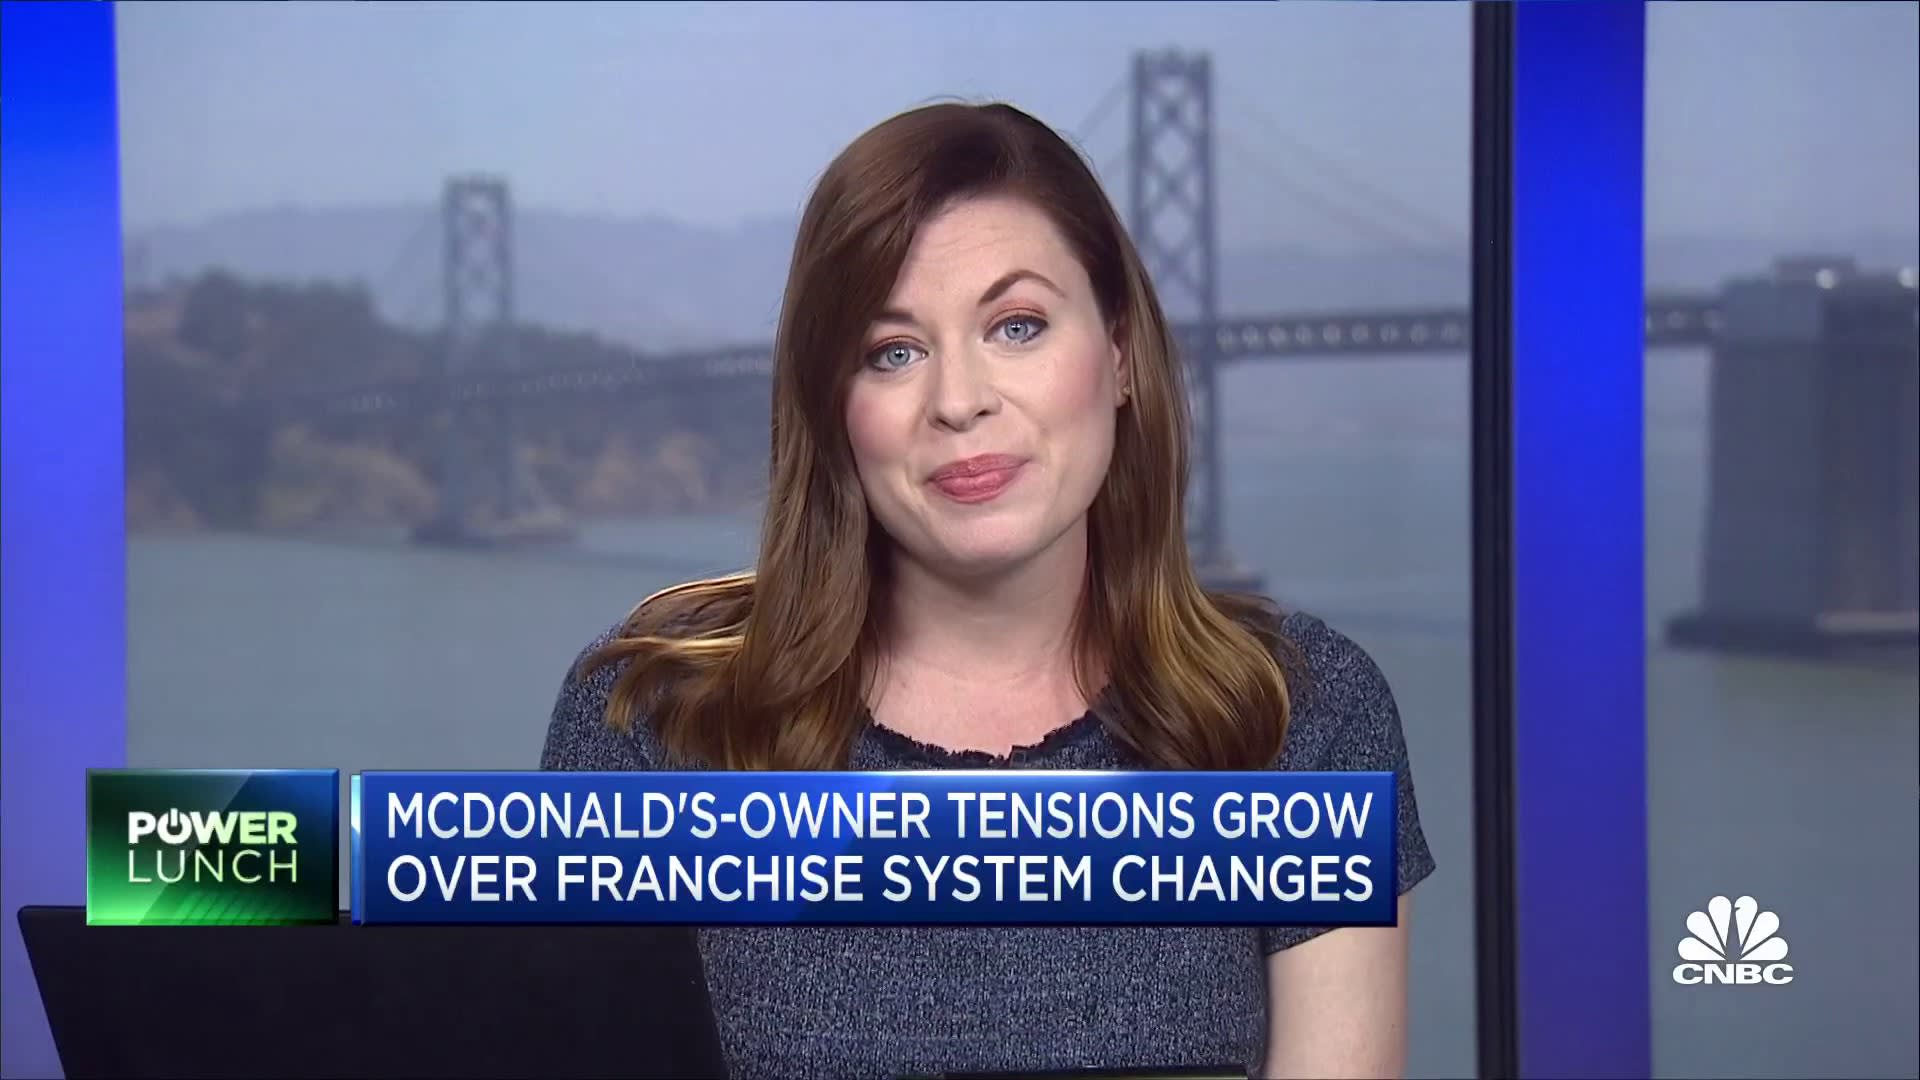 Franchisees push back on McDonald’s over upcoming changes